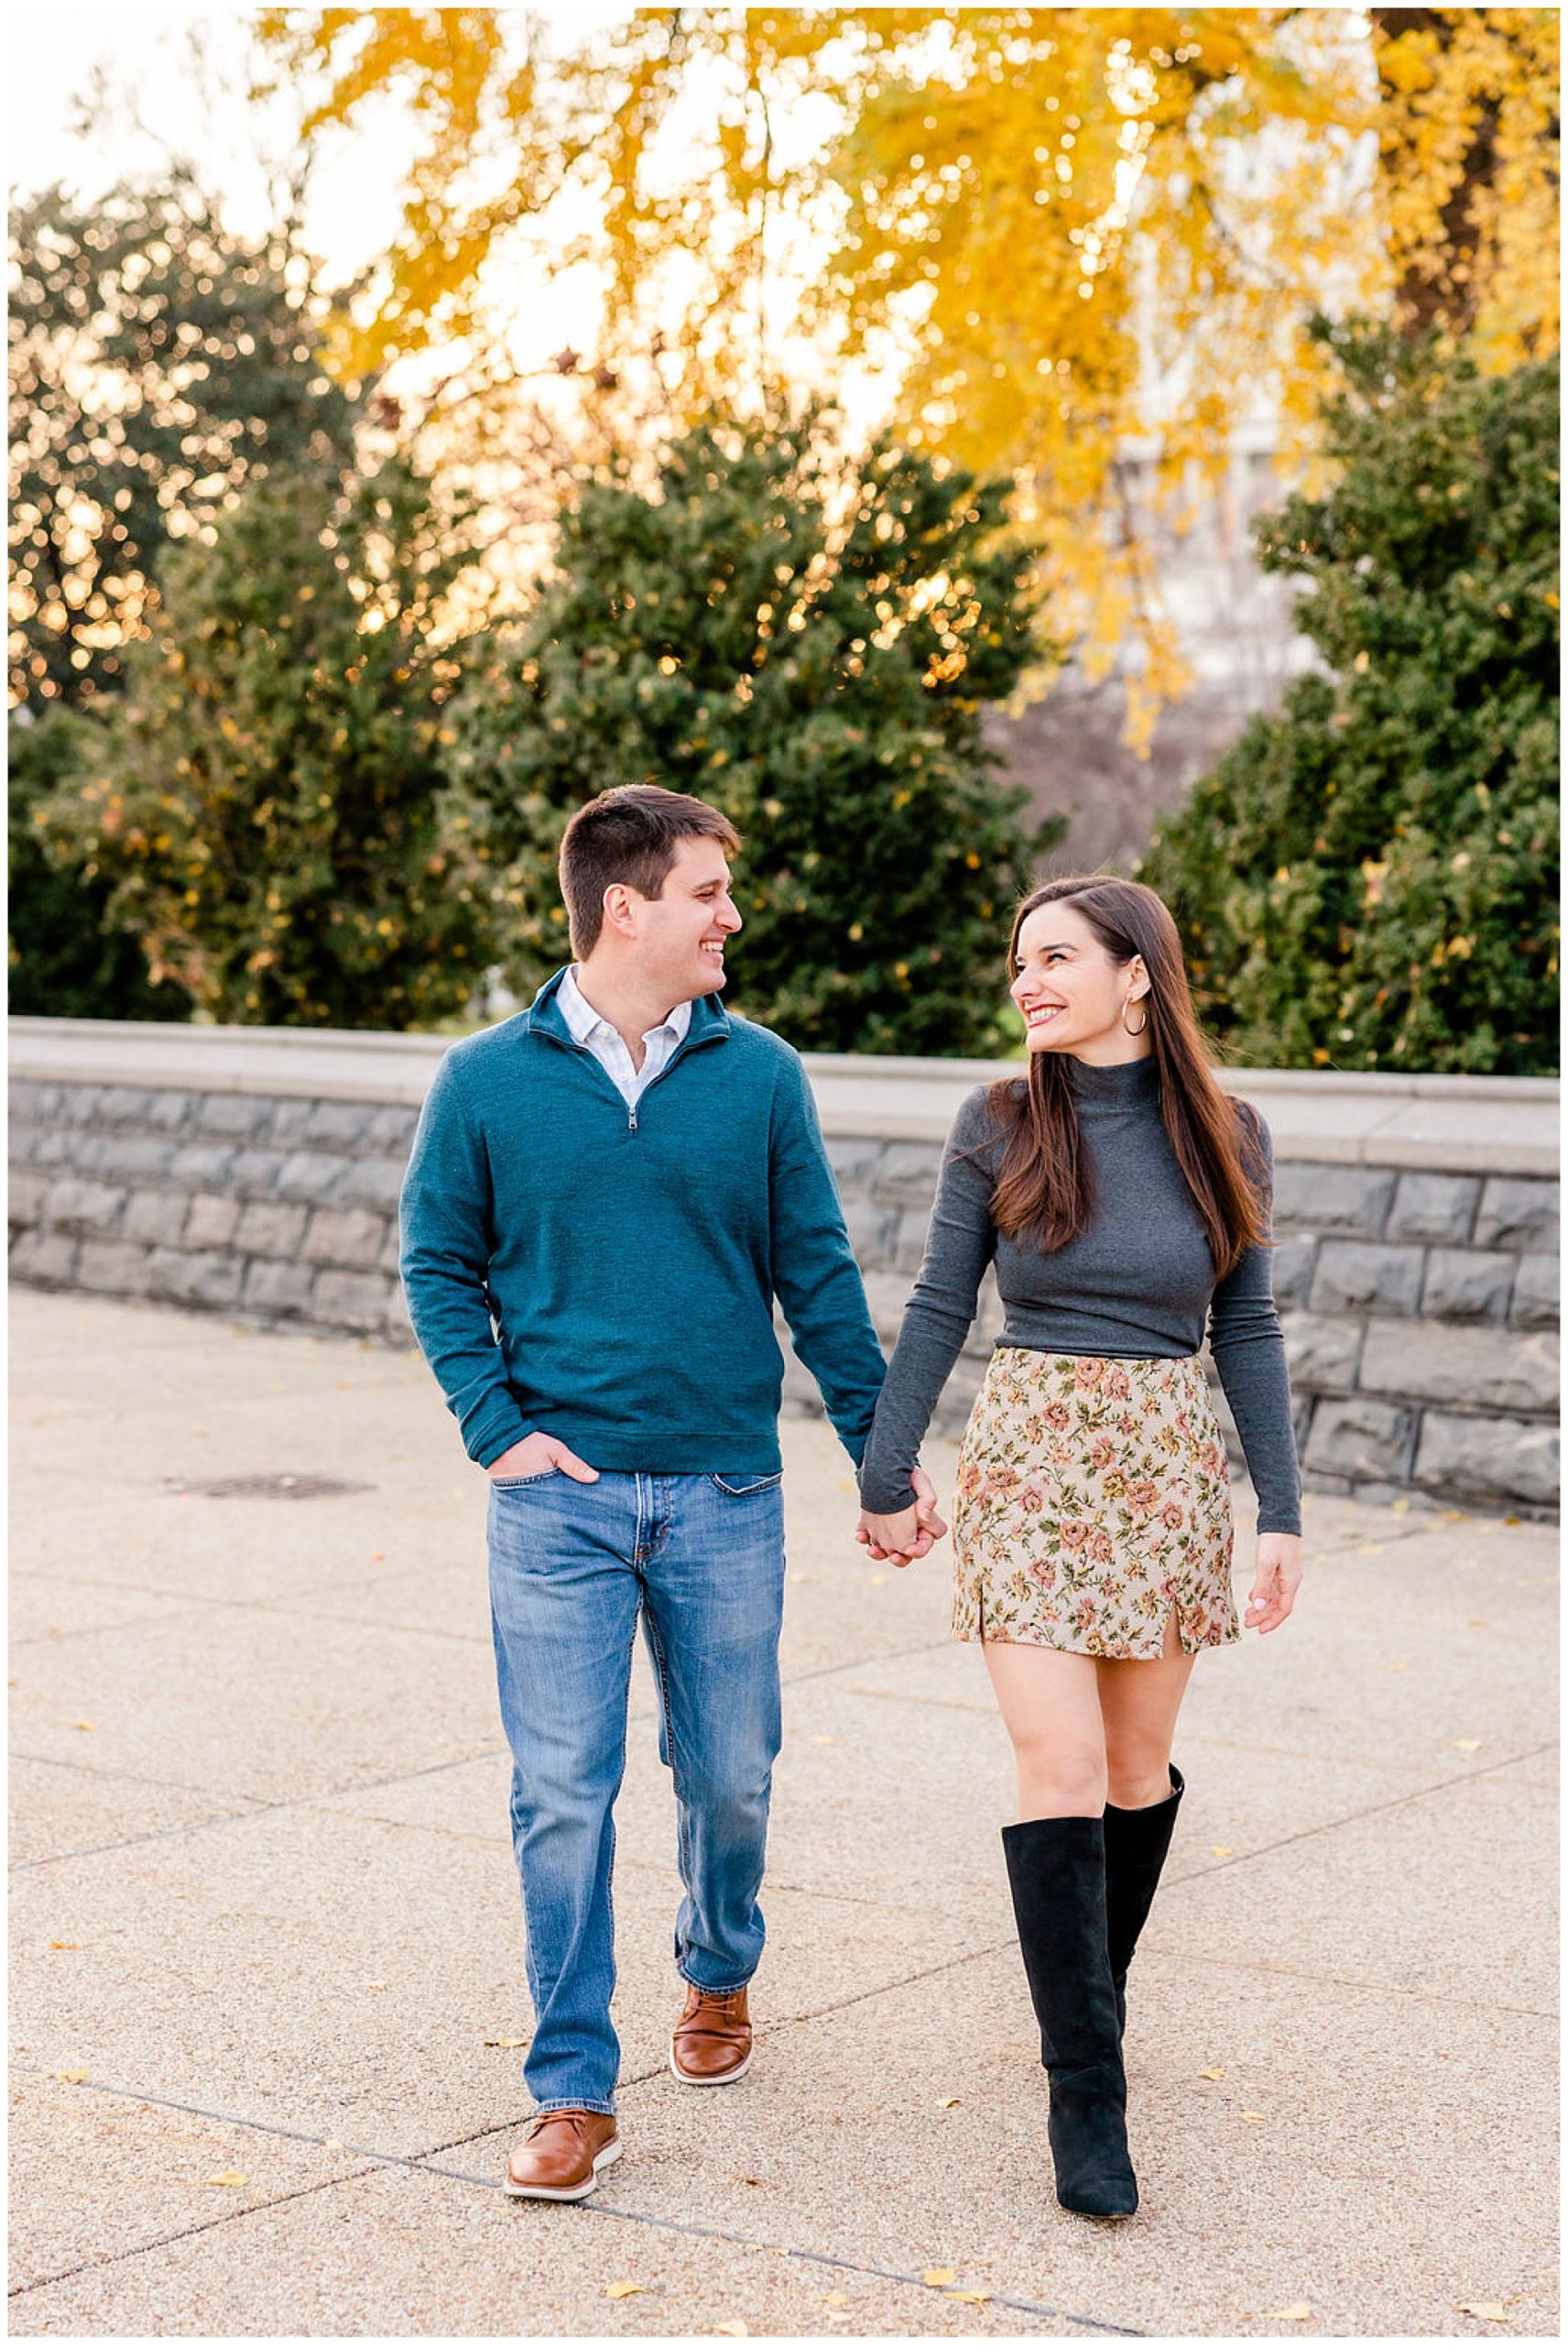 autumn Capitol Hill engagement session, Capitol Hill engagement photos, Capitol Hill photographer, DC engagement photography, DC engagement photographer, DC wedding photography, autumn engagement photos, casual engagement photos, Rachel E.H. Photography, couple holding hands, couple smiling at each other, gray mock neck, black boots